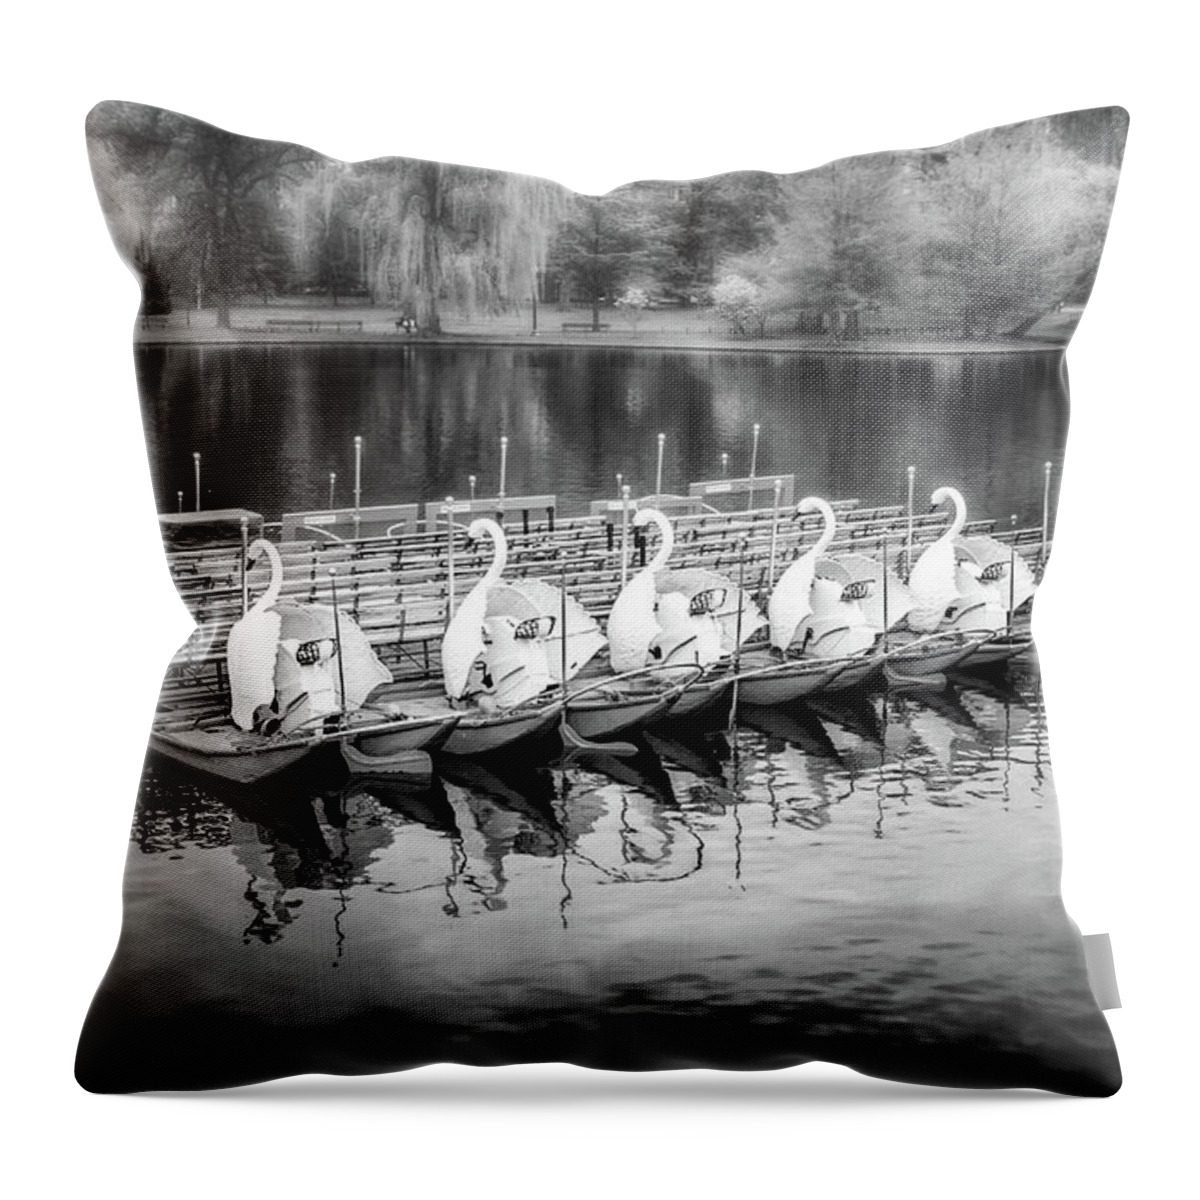 Boston Throw Pillow featuring the photograph Boston Public Garden Swan Boats Black and White by Carol Japp